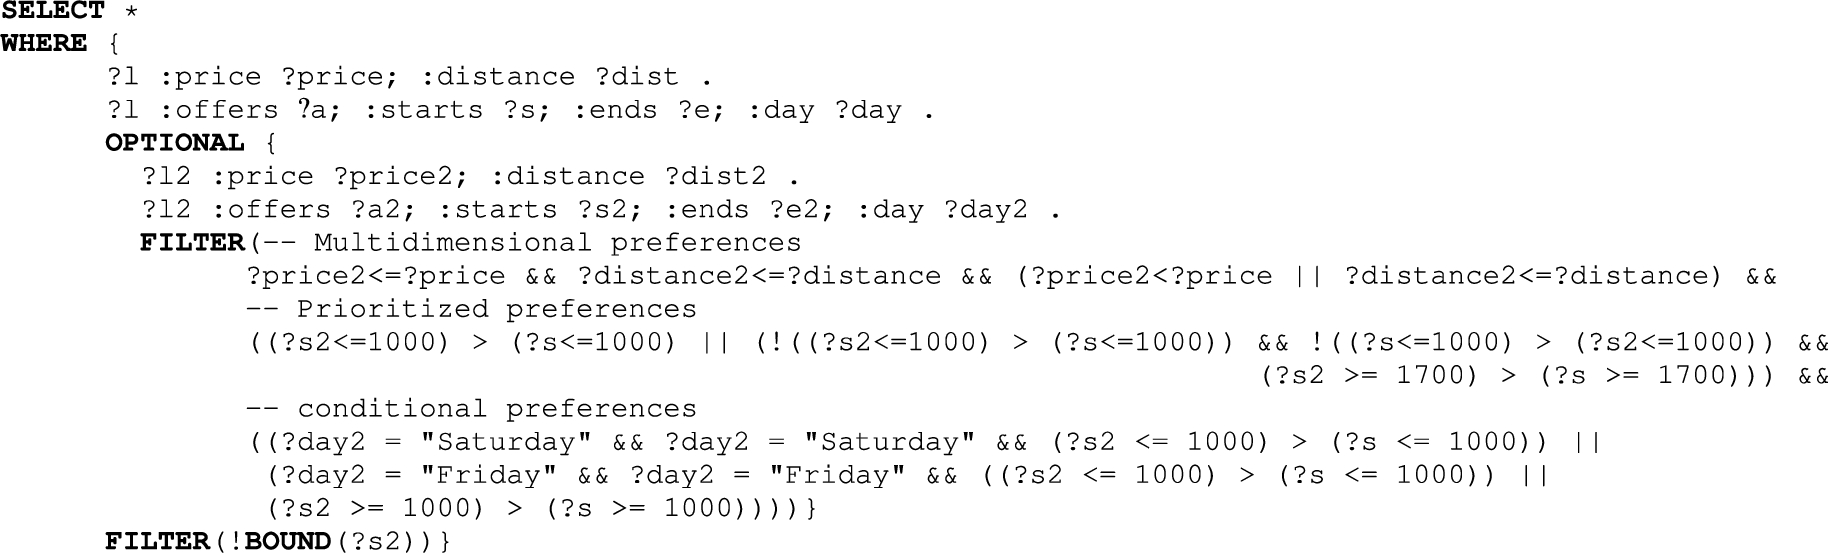 A sample SPARQL translated qualitative preference query for booking a PCR appointment. The query identifies cheaper and closer laboratories with earlier appointments before 10:00 or after 17:00 on Friday or Saturday by means of a nested SPARQL query.